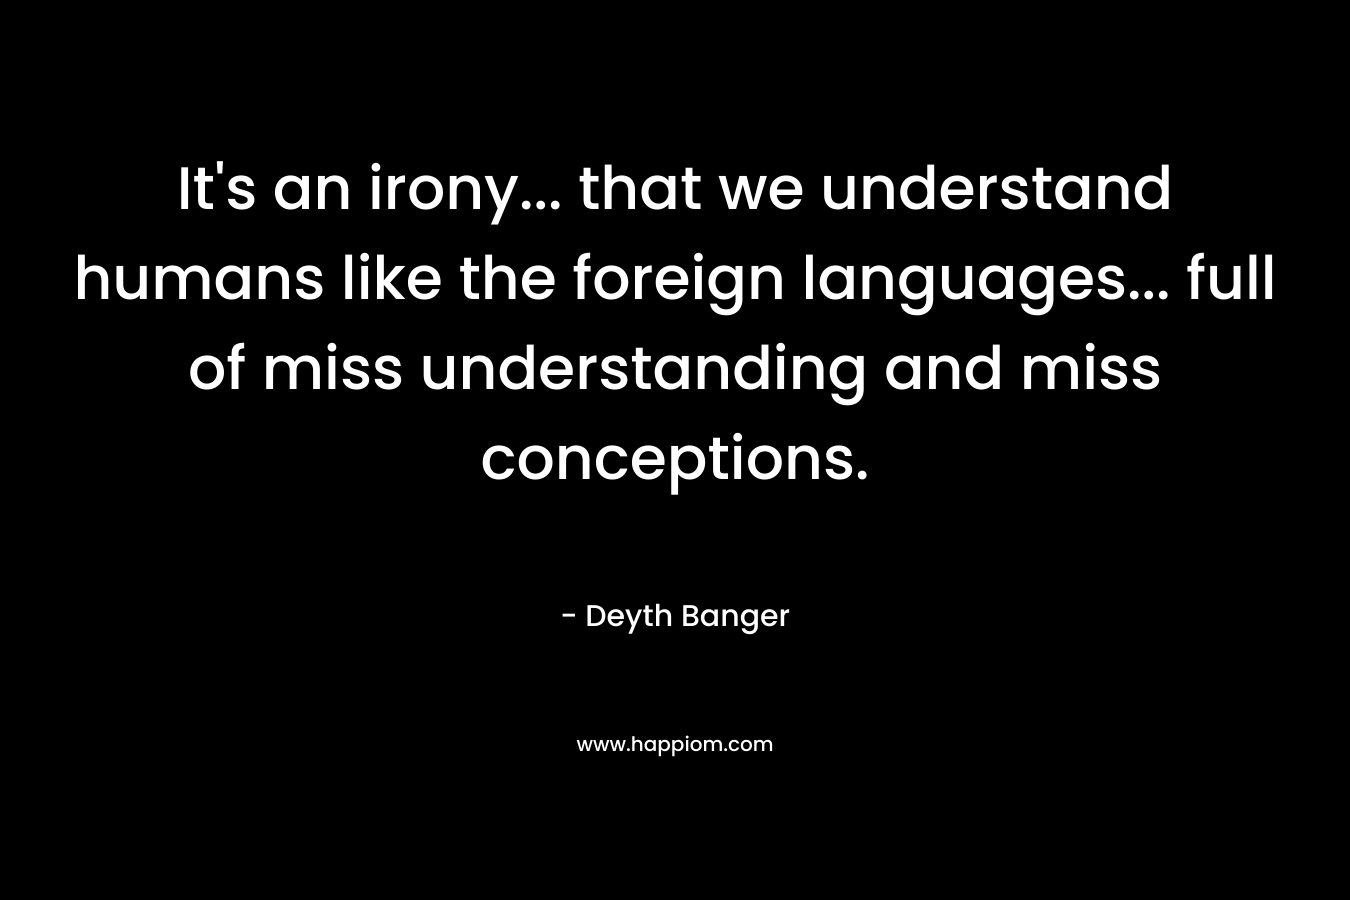 It’s an irony… that we understand humans like the foreign languages… full of miss understanding and miss conceptions. – Deyth Banger